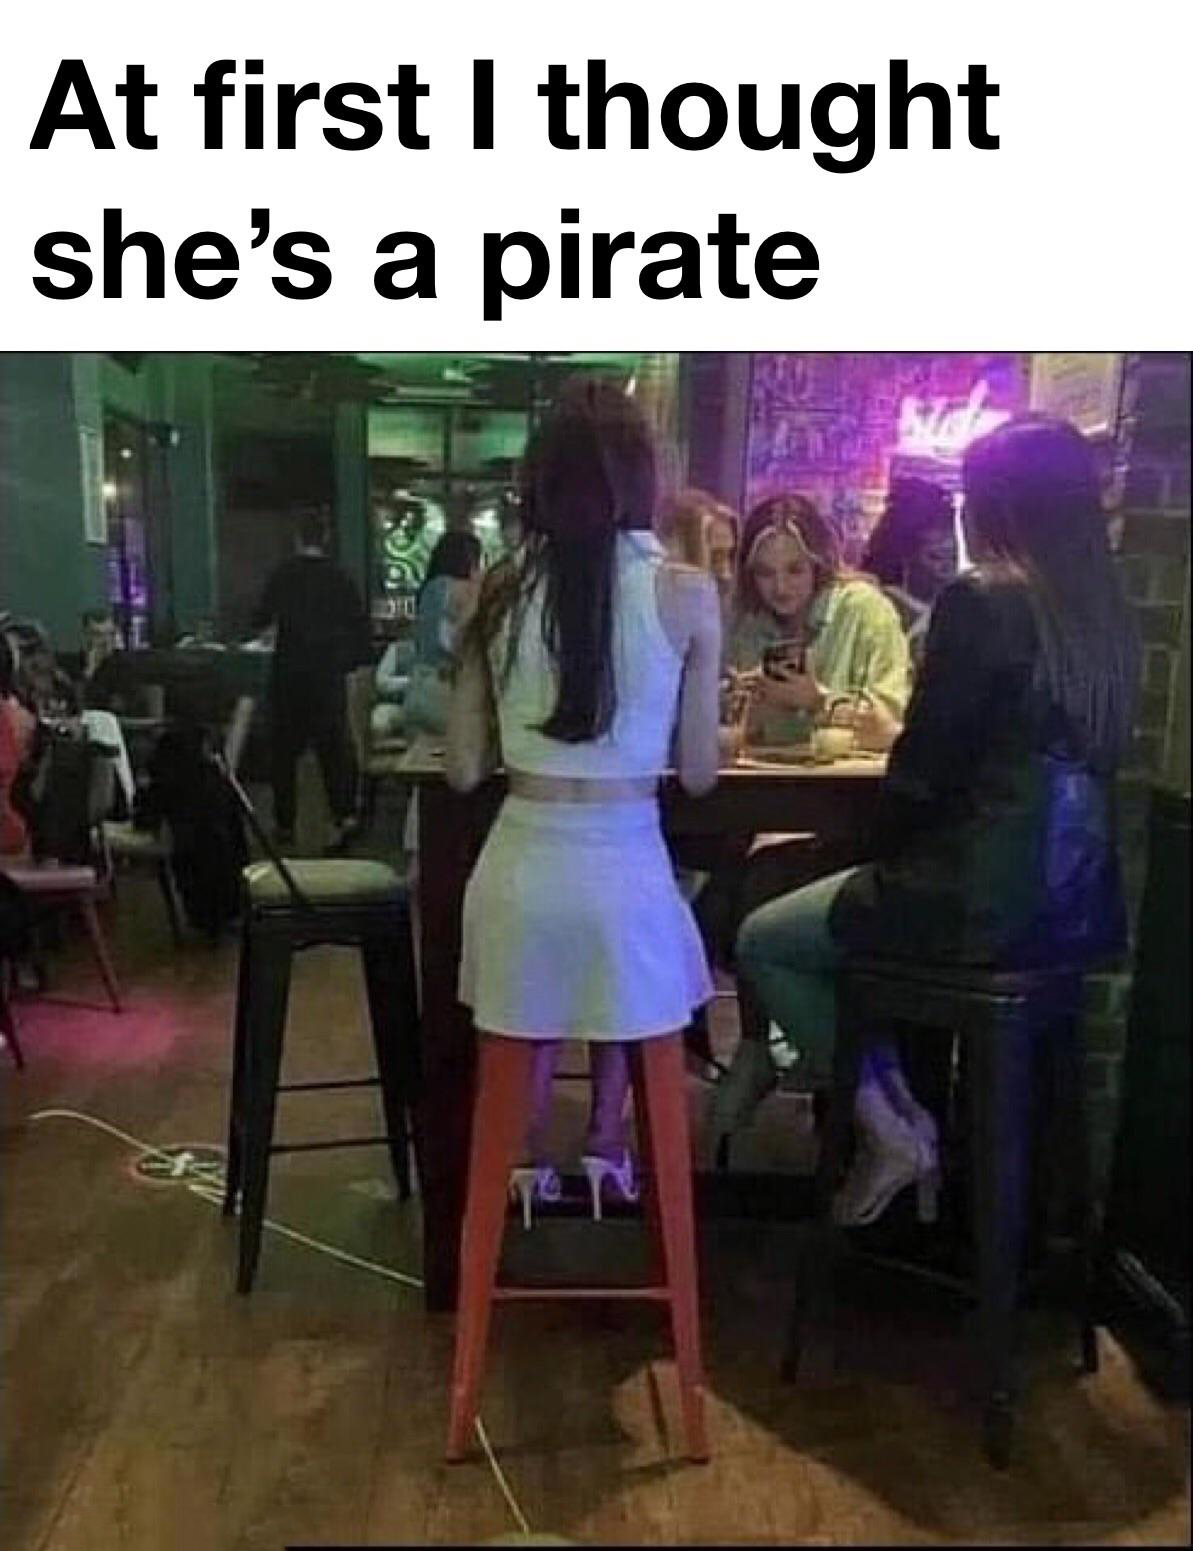 dank memes - funny memes - thought she was a pirate meme - At first I thought she's a pirate